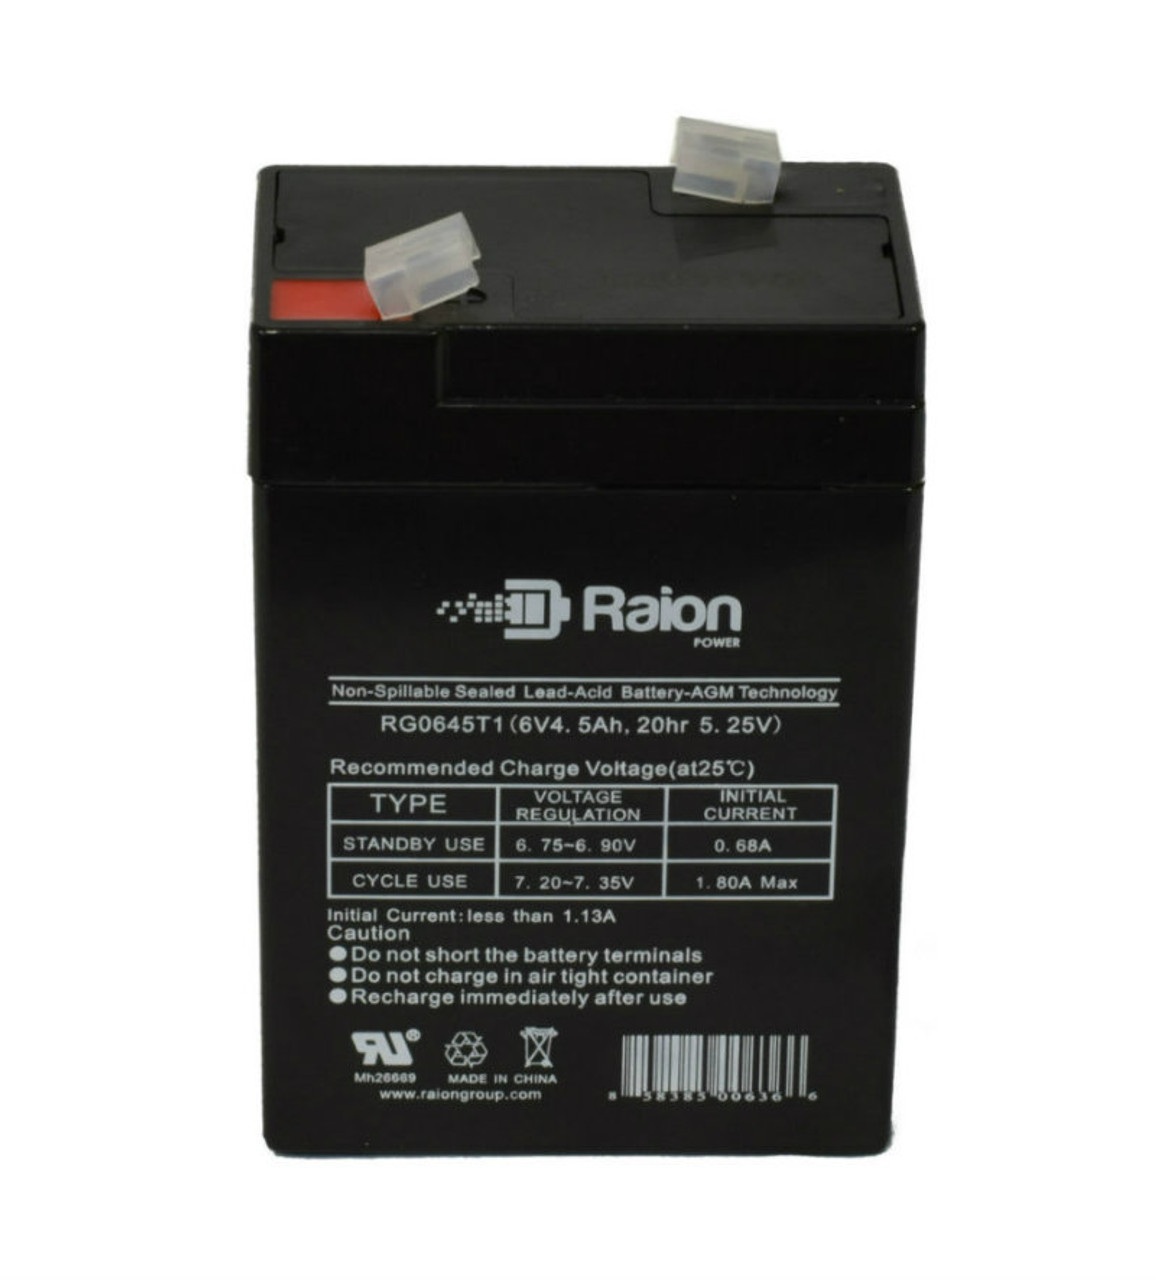 Raion Power RG0645T1 Replacement Battery Cartridge for National Power LS016M4